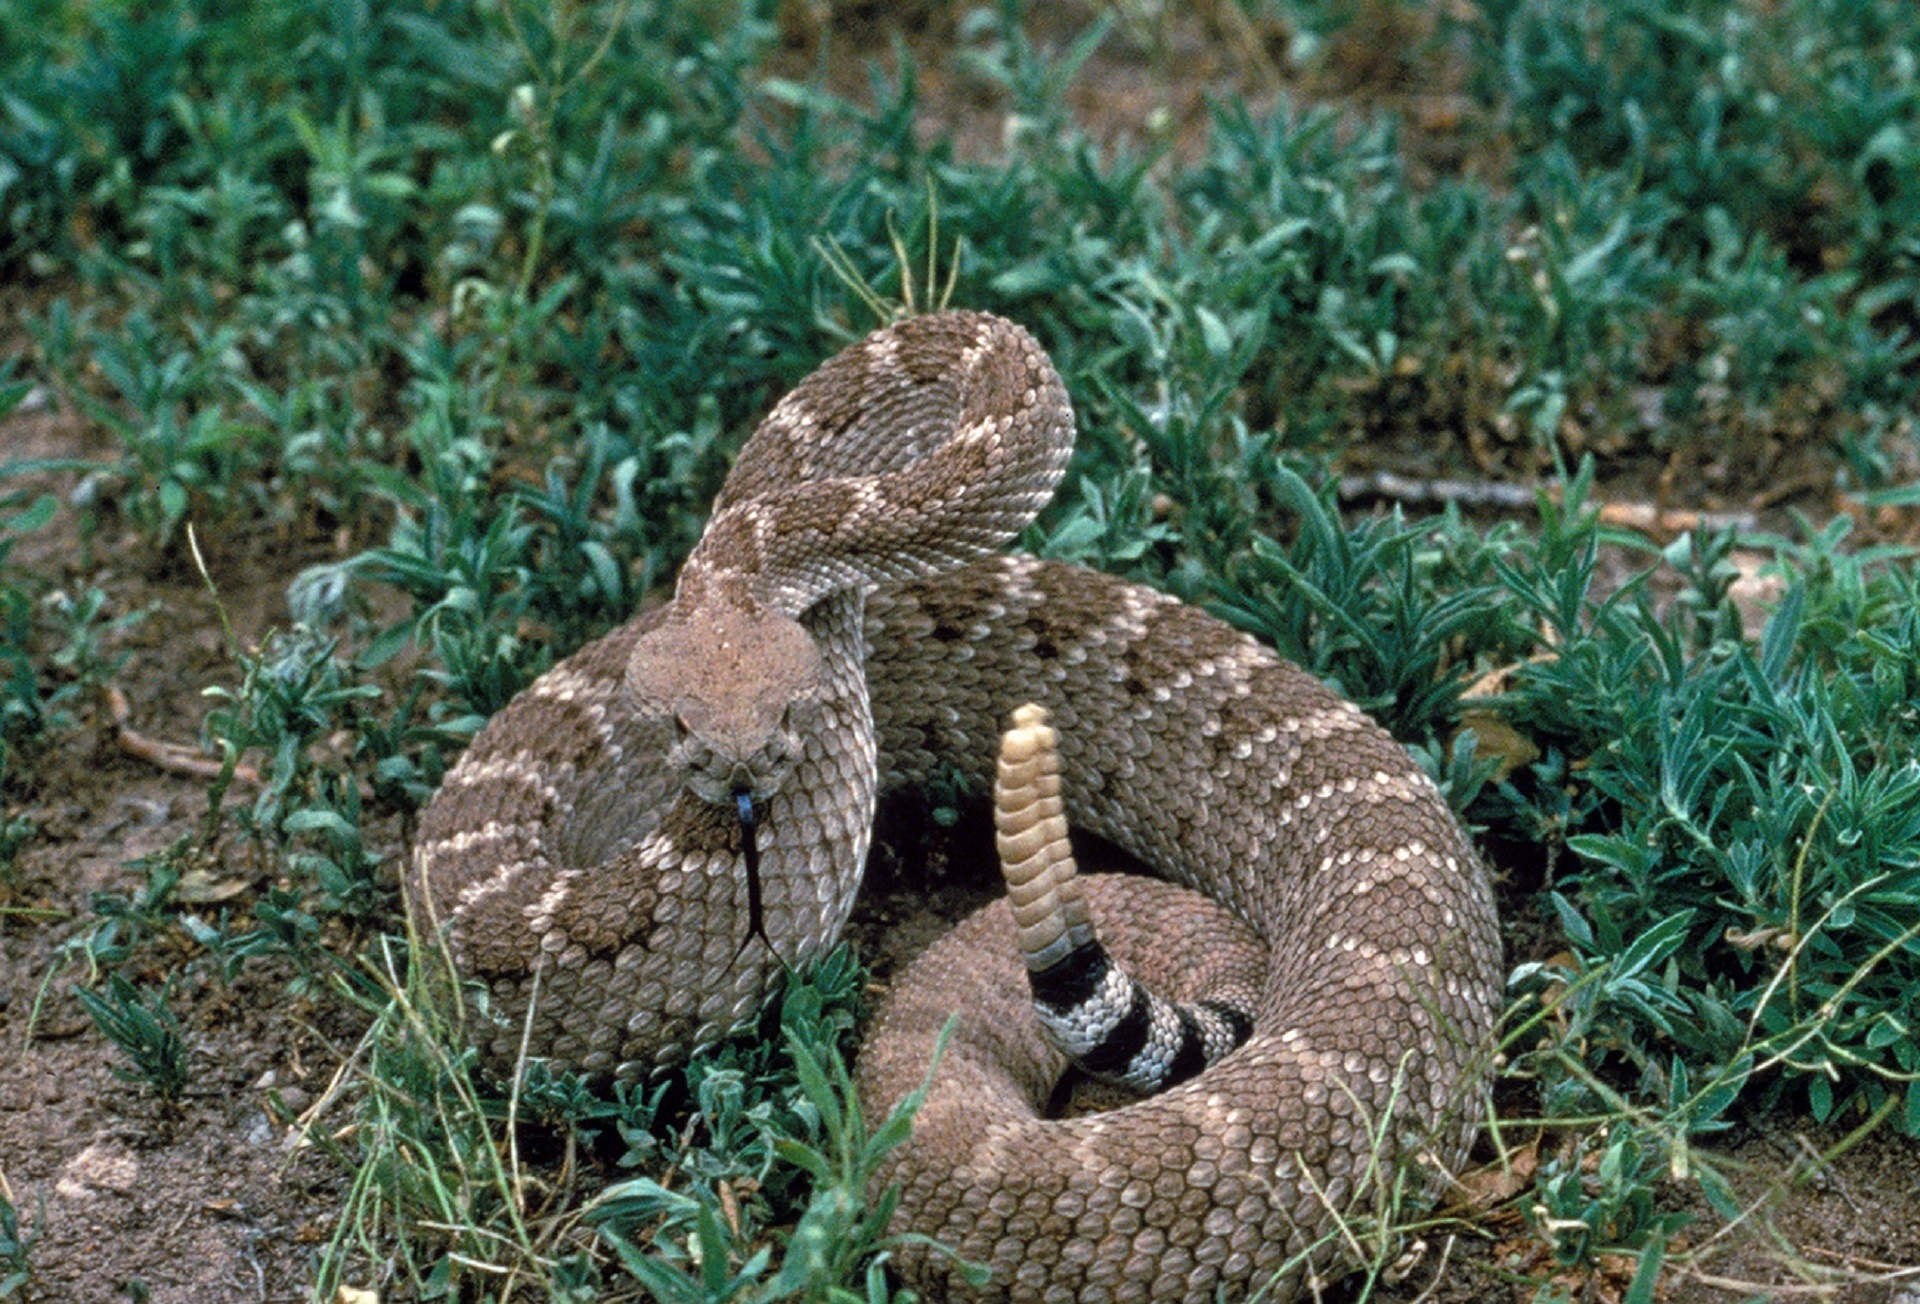 what should you do if bitten by rattlesnake